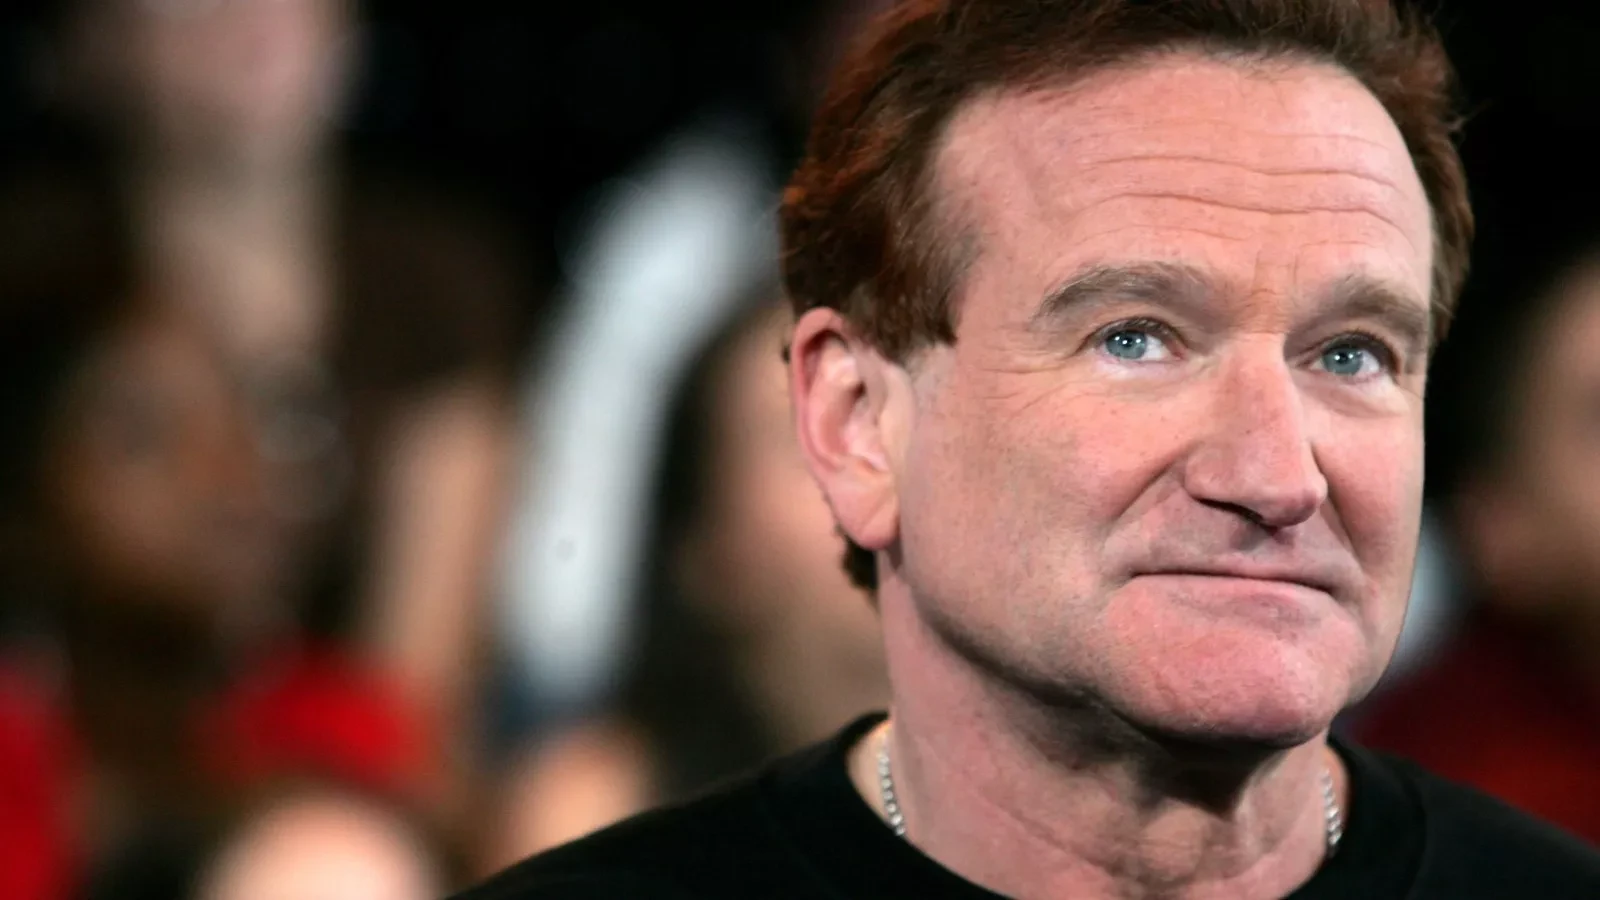 Robin Williams has left an indelible mark on the history of cinema